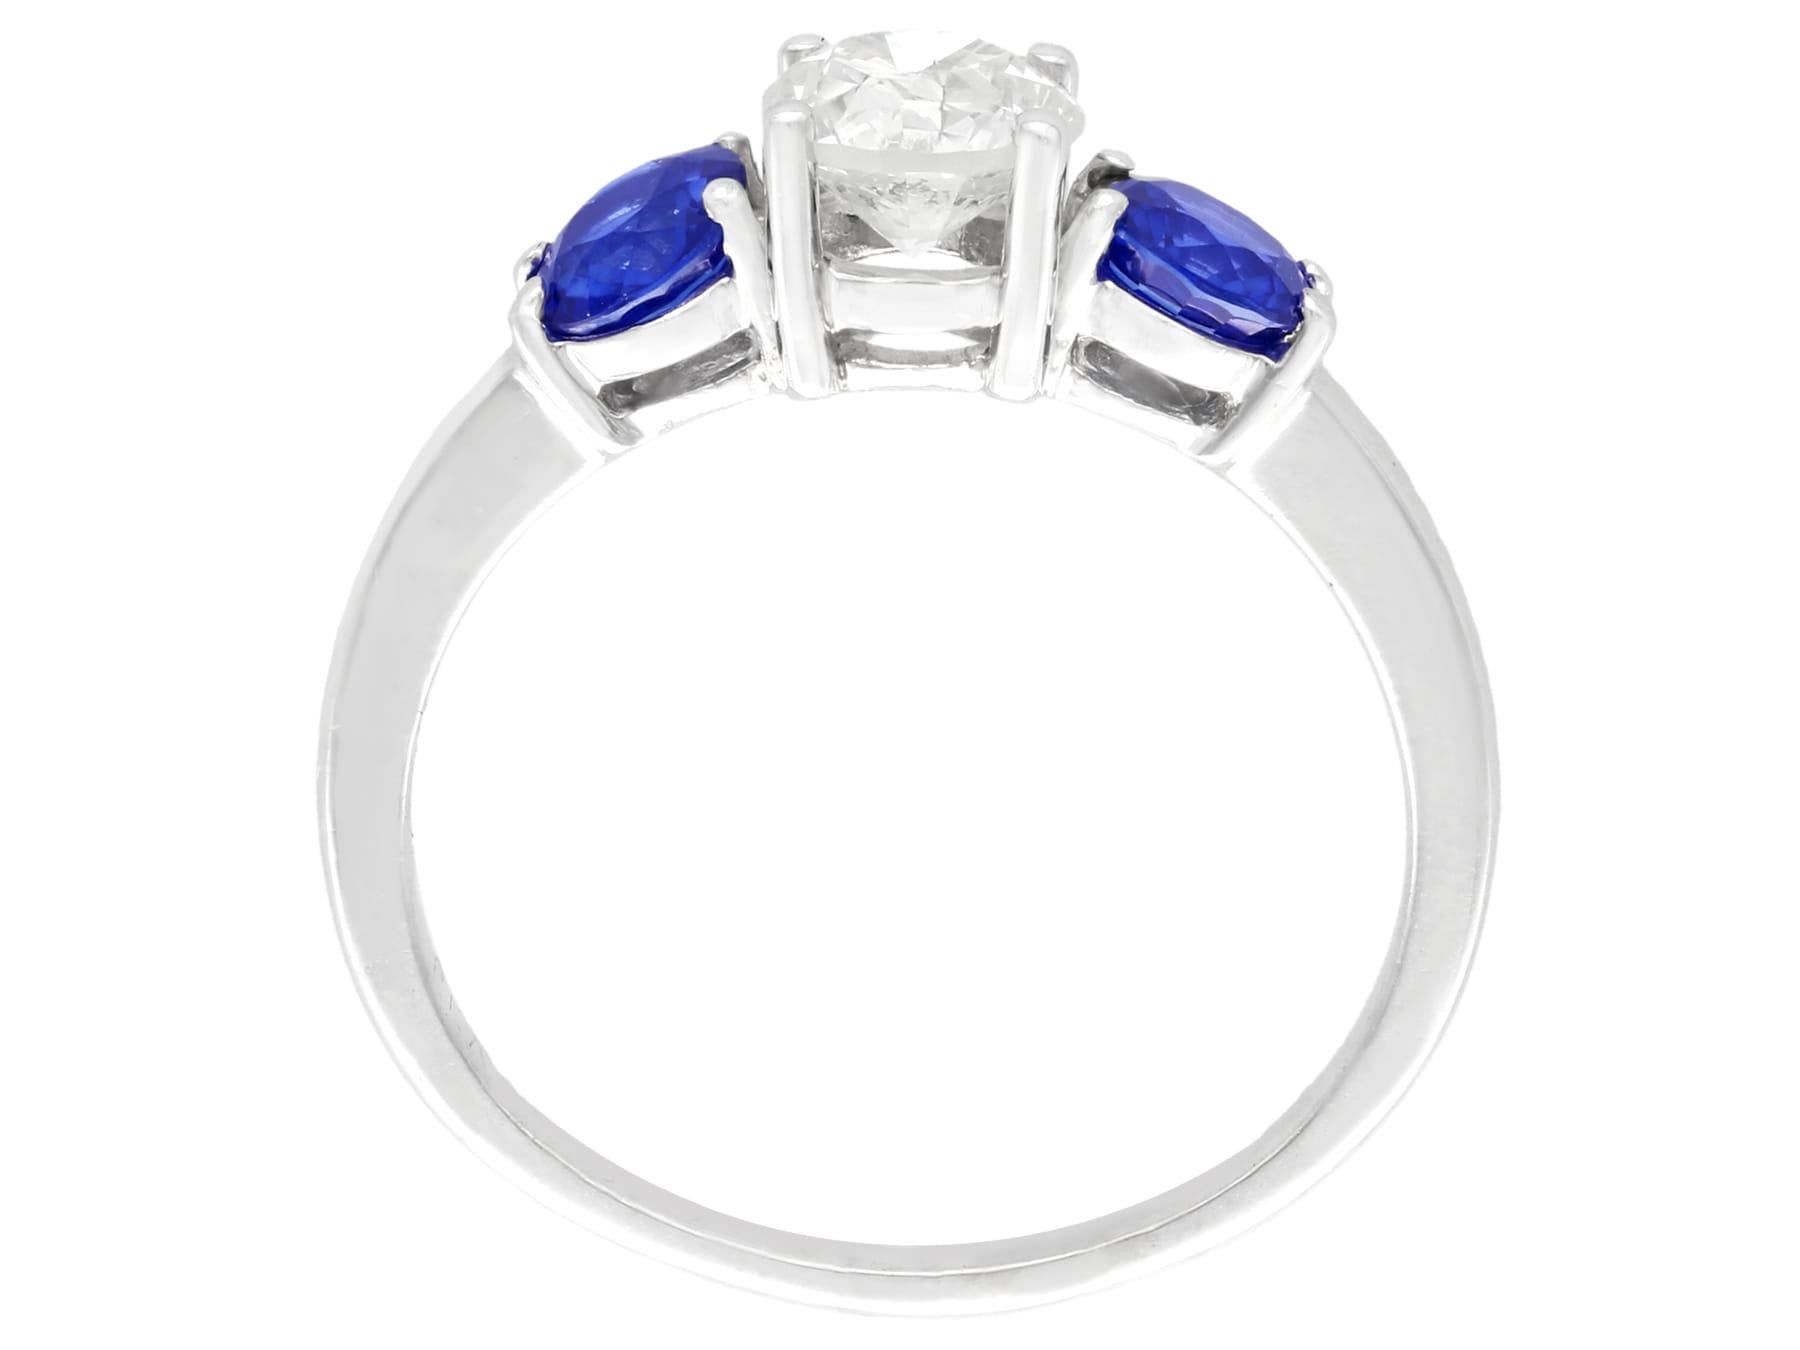 1.02 Carat Diamond and Sapphire Platinum Trilogy Ring In Excellent Condition For Sale In Jesmond, Newcastle Upon Tyne